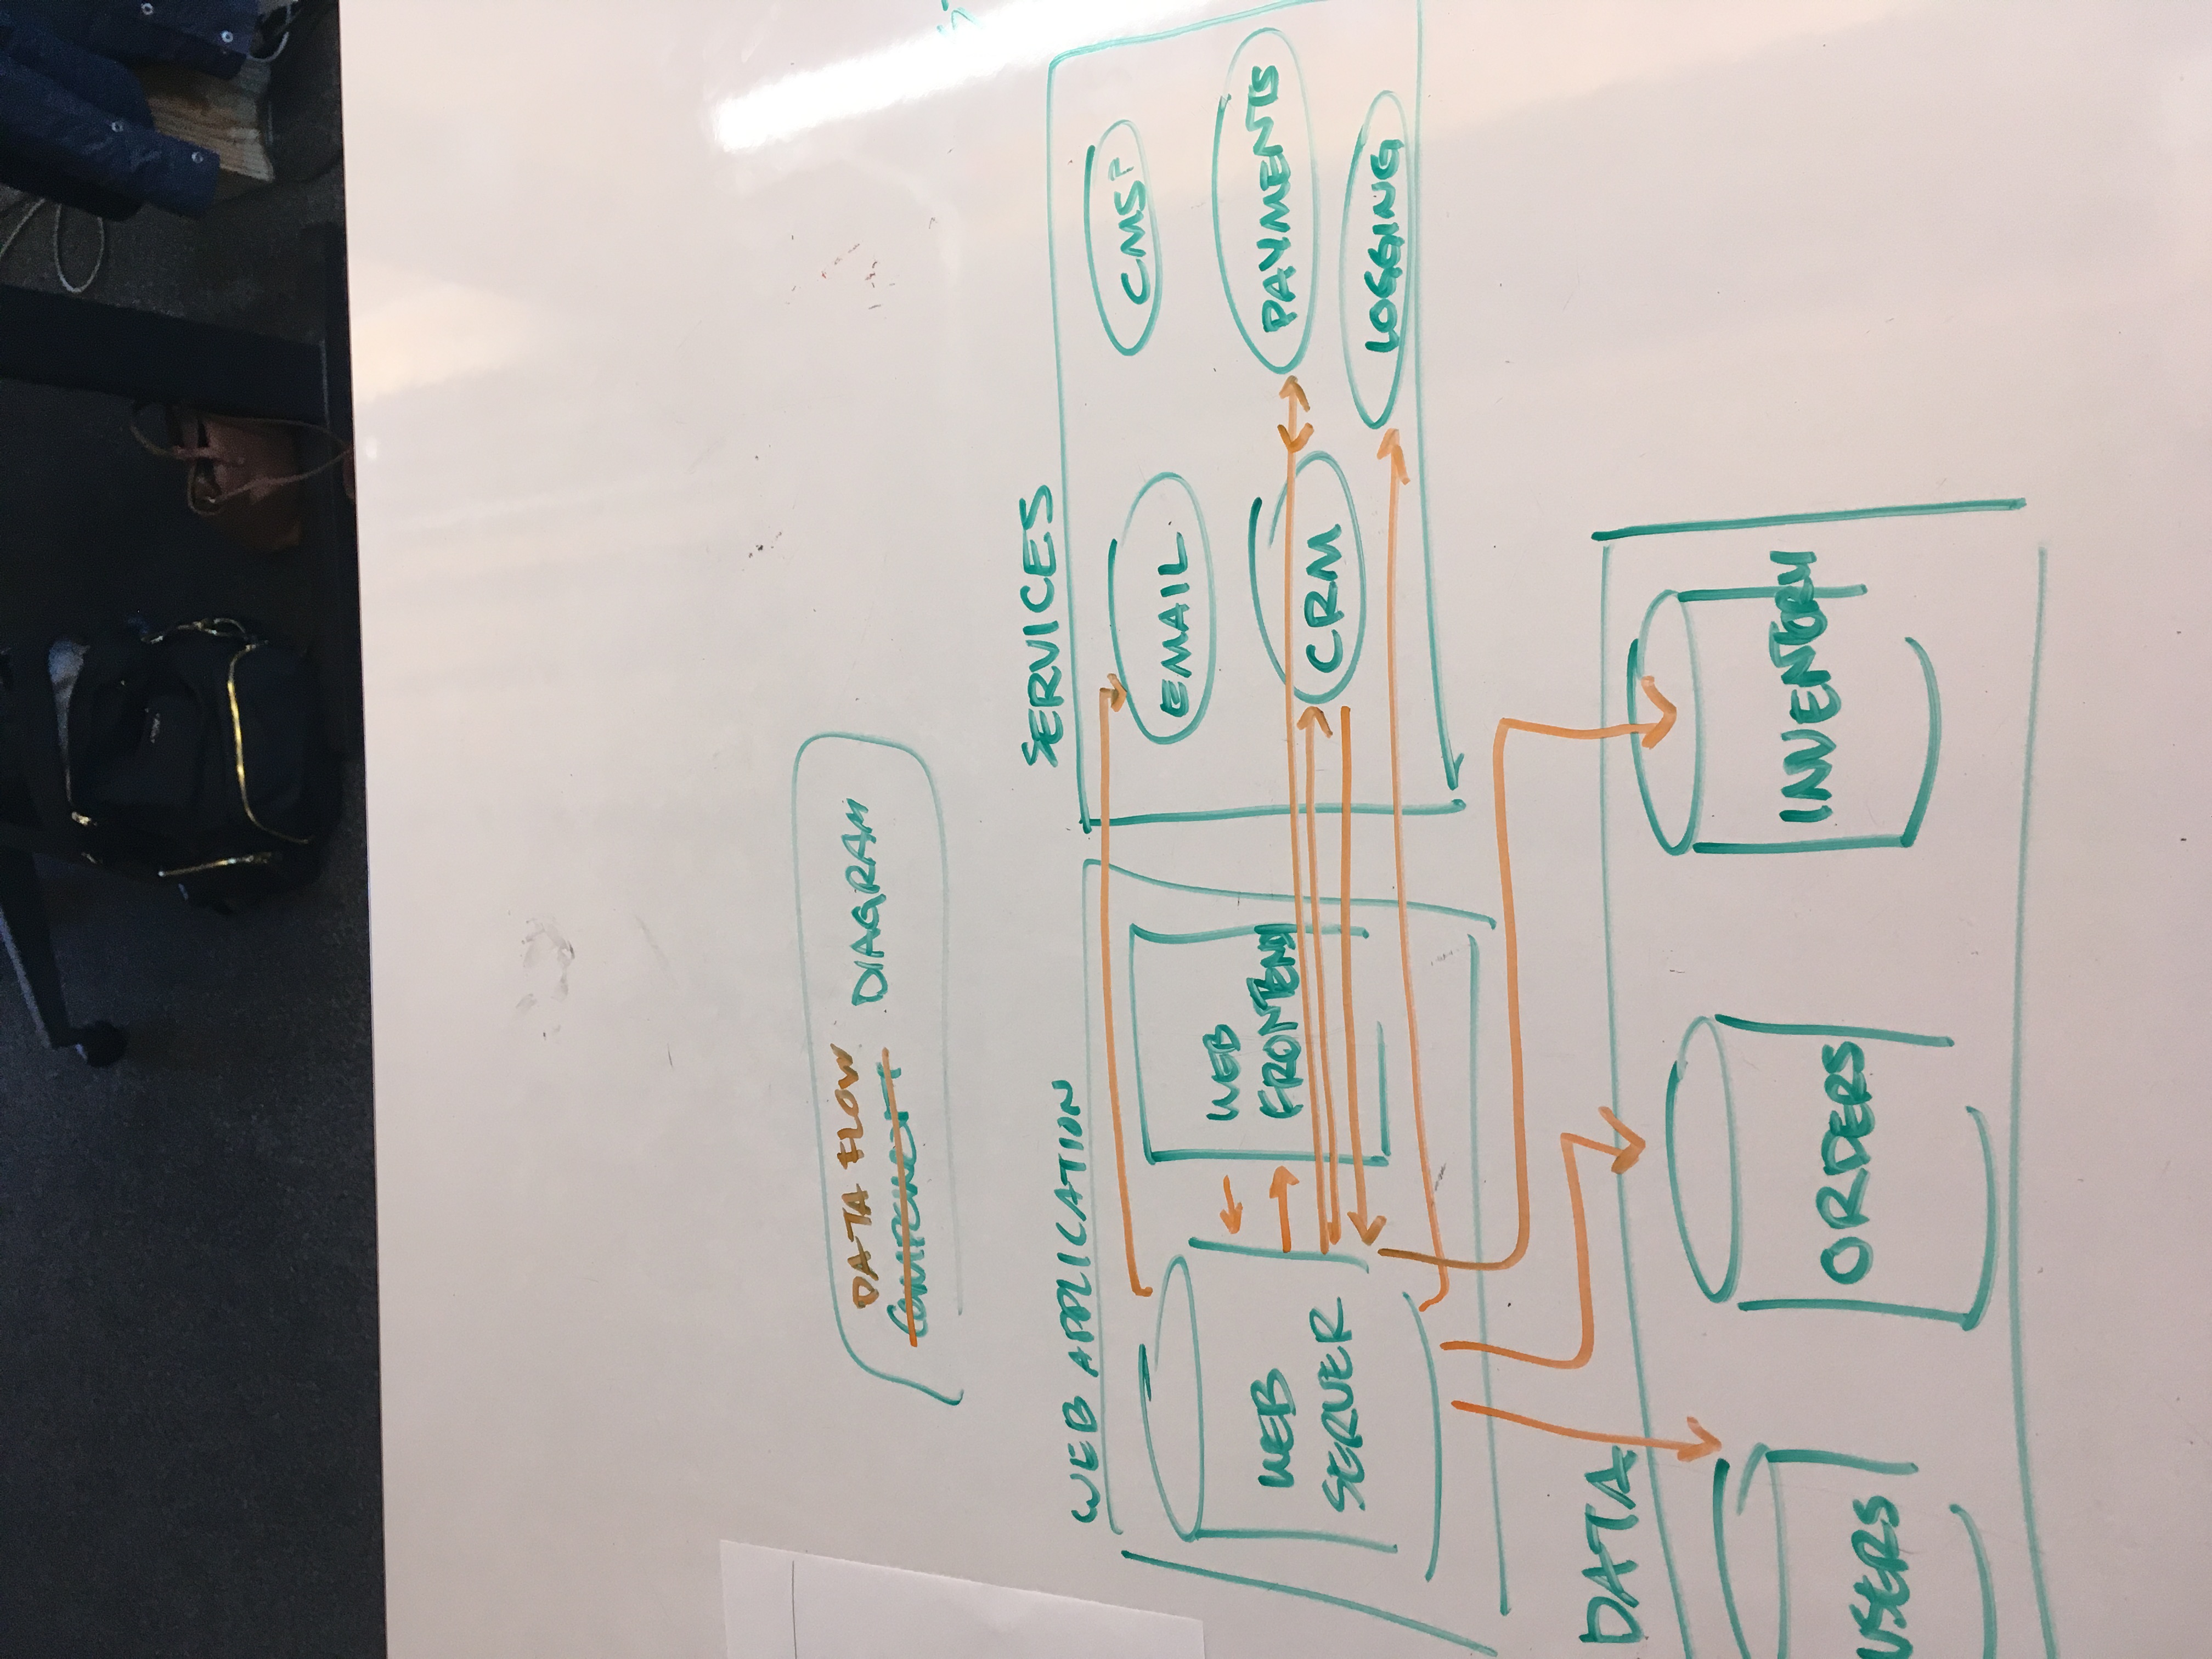 A green-and-orange web application architecture diagram drawn on a whiteboard table.